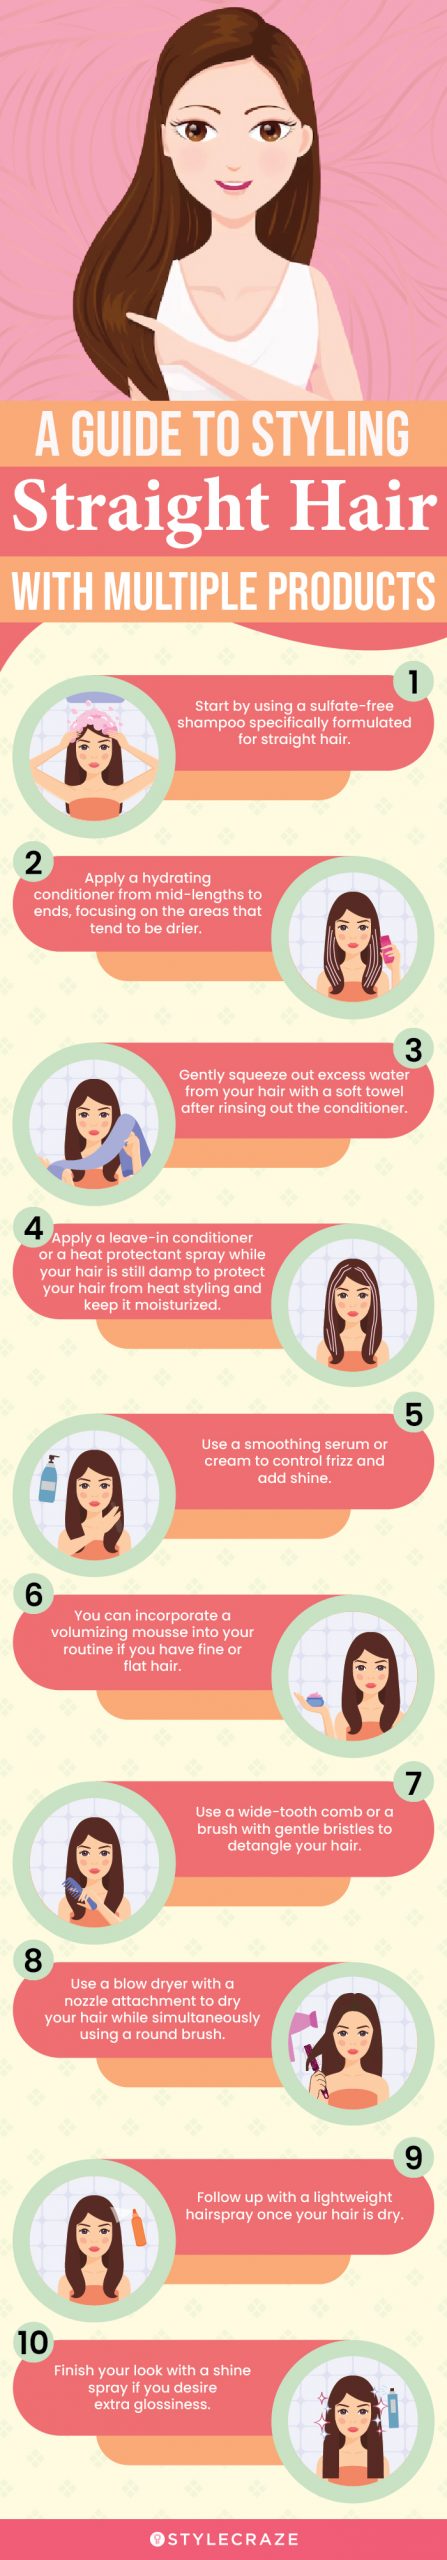 A Guide To Styling Straight Hair With Multiple Products (infographic)